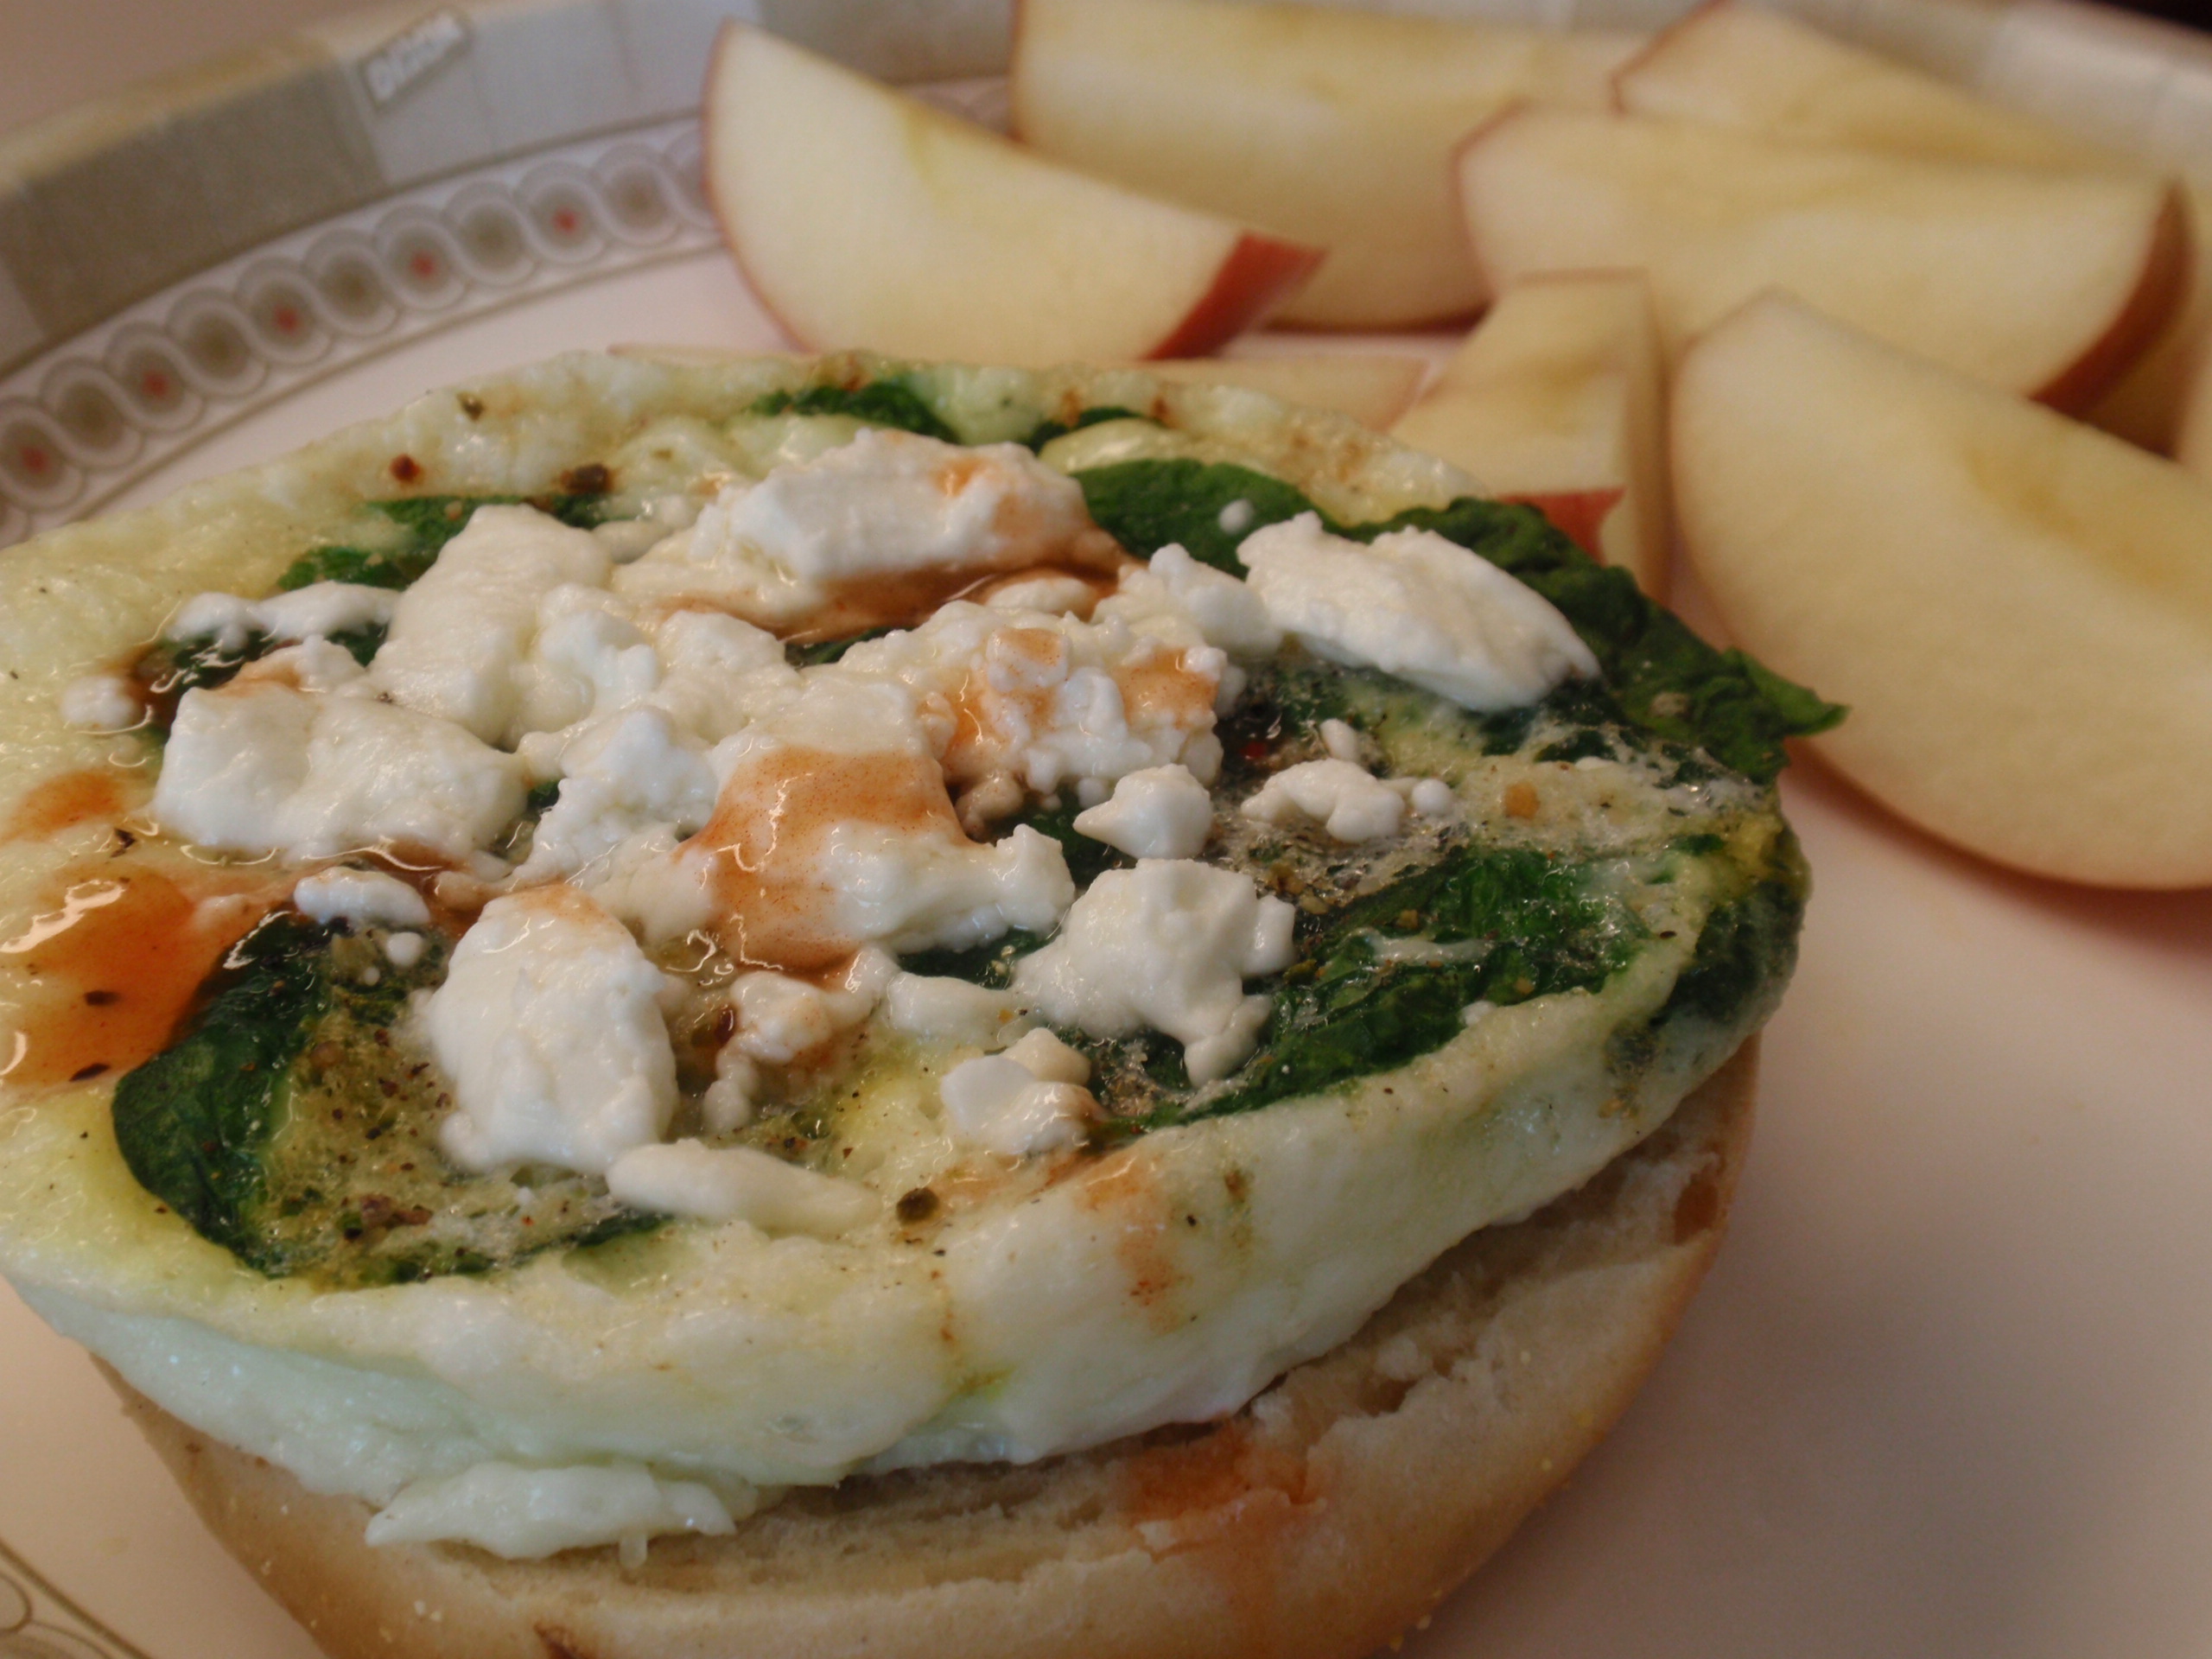 1/2 onion bagel, 1/2 cup egg whites, handful of spinach, ff feta cheese, TABASCO, and small fuji apple